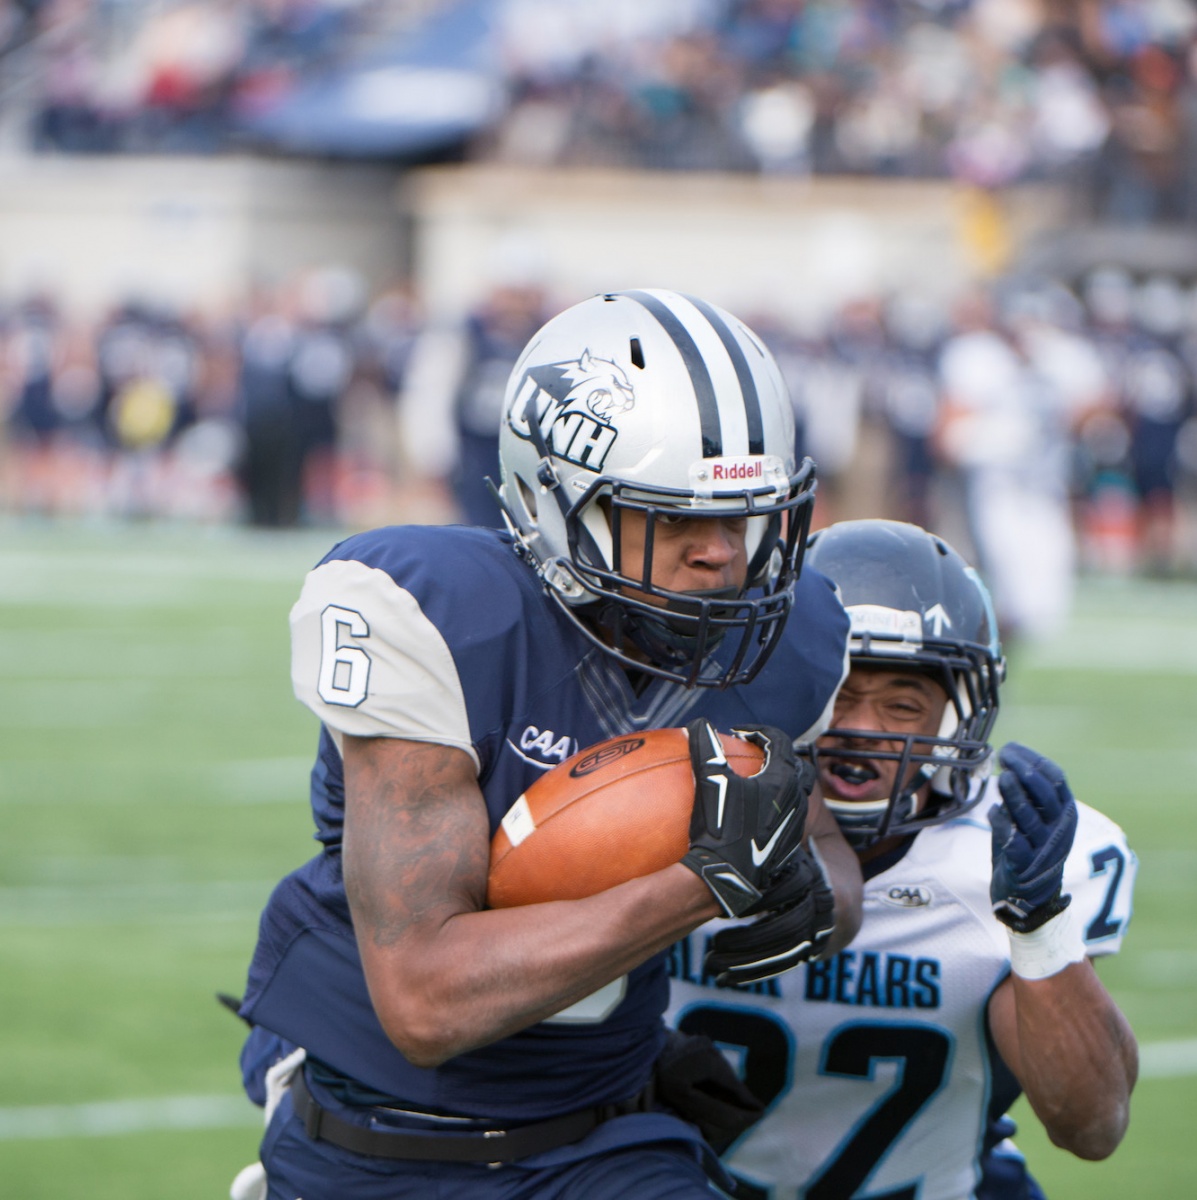 A UNH football player carrying the ball up the field